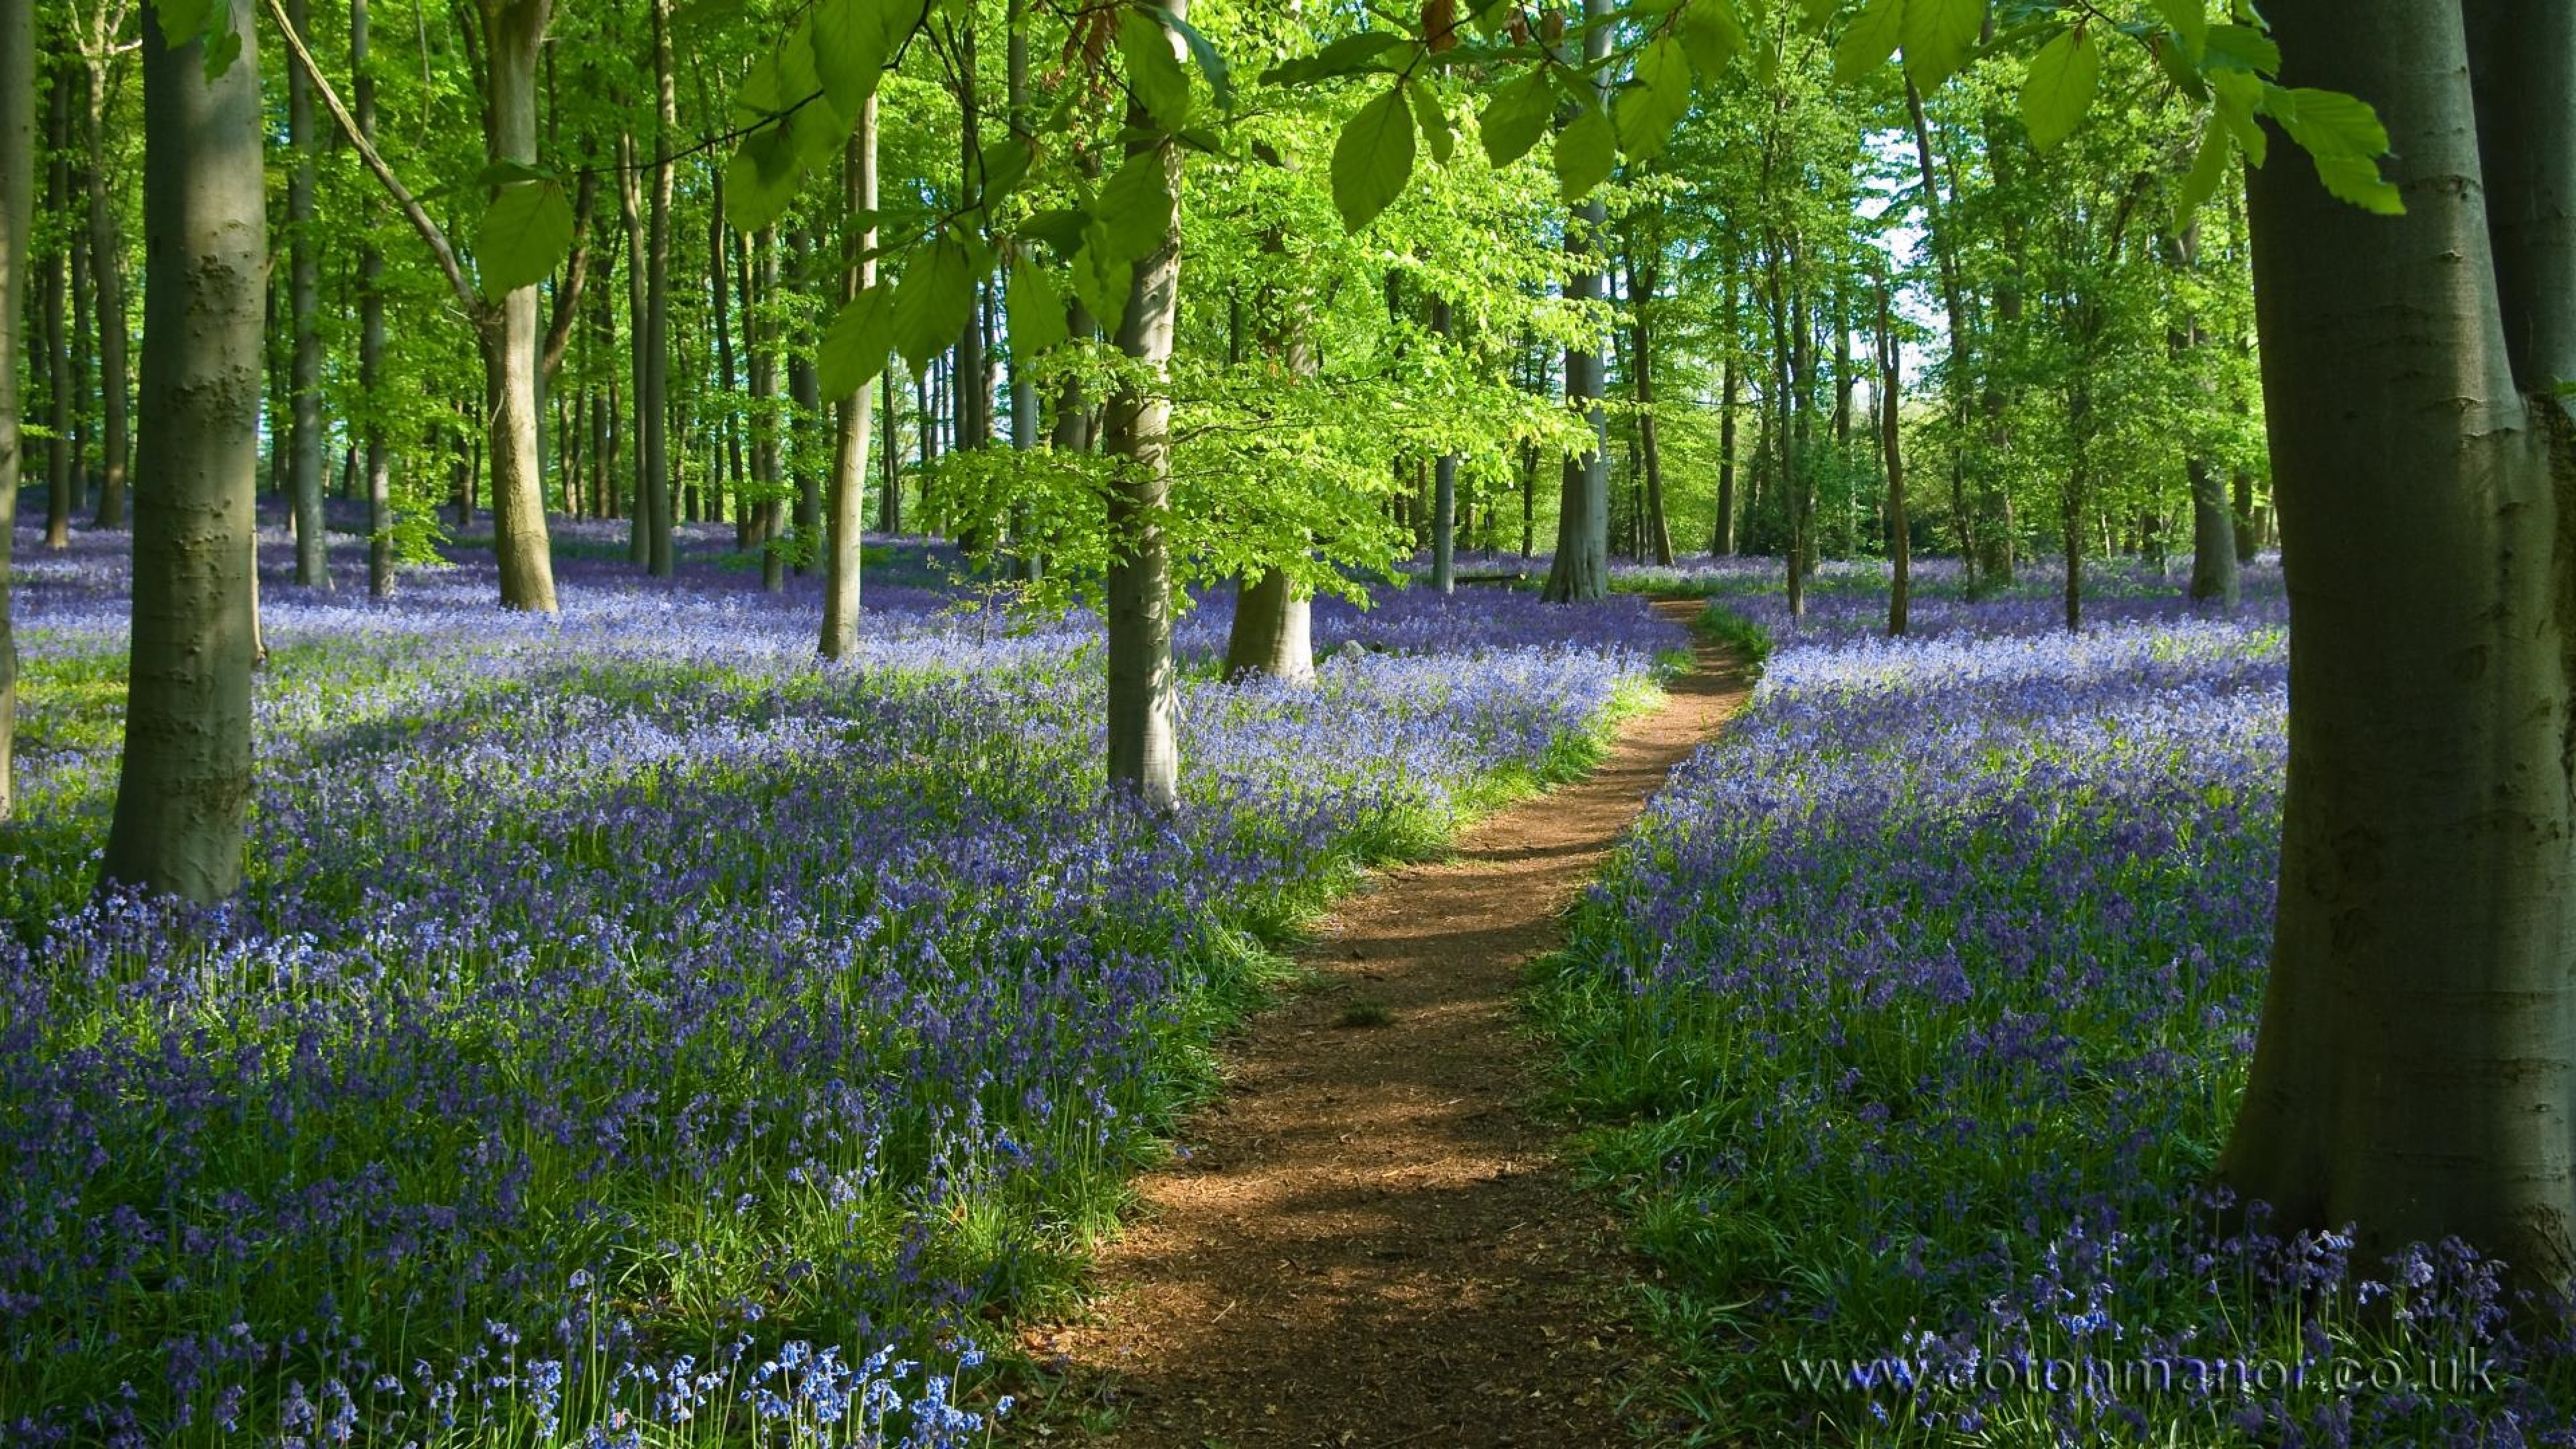 Bluebells in Shady Forest